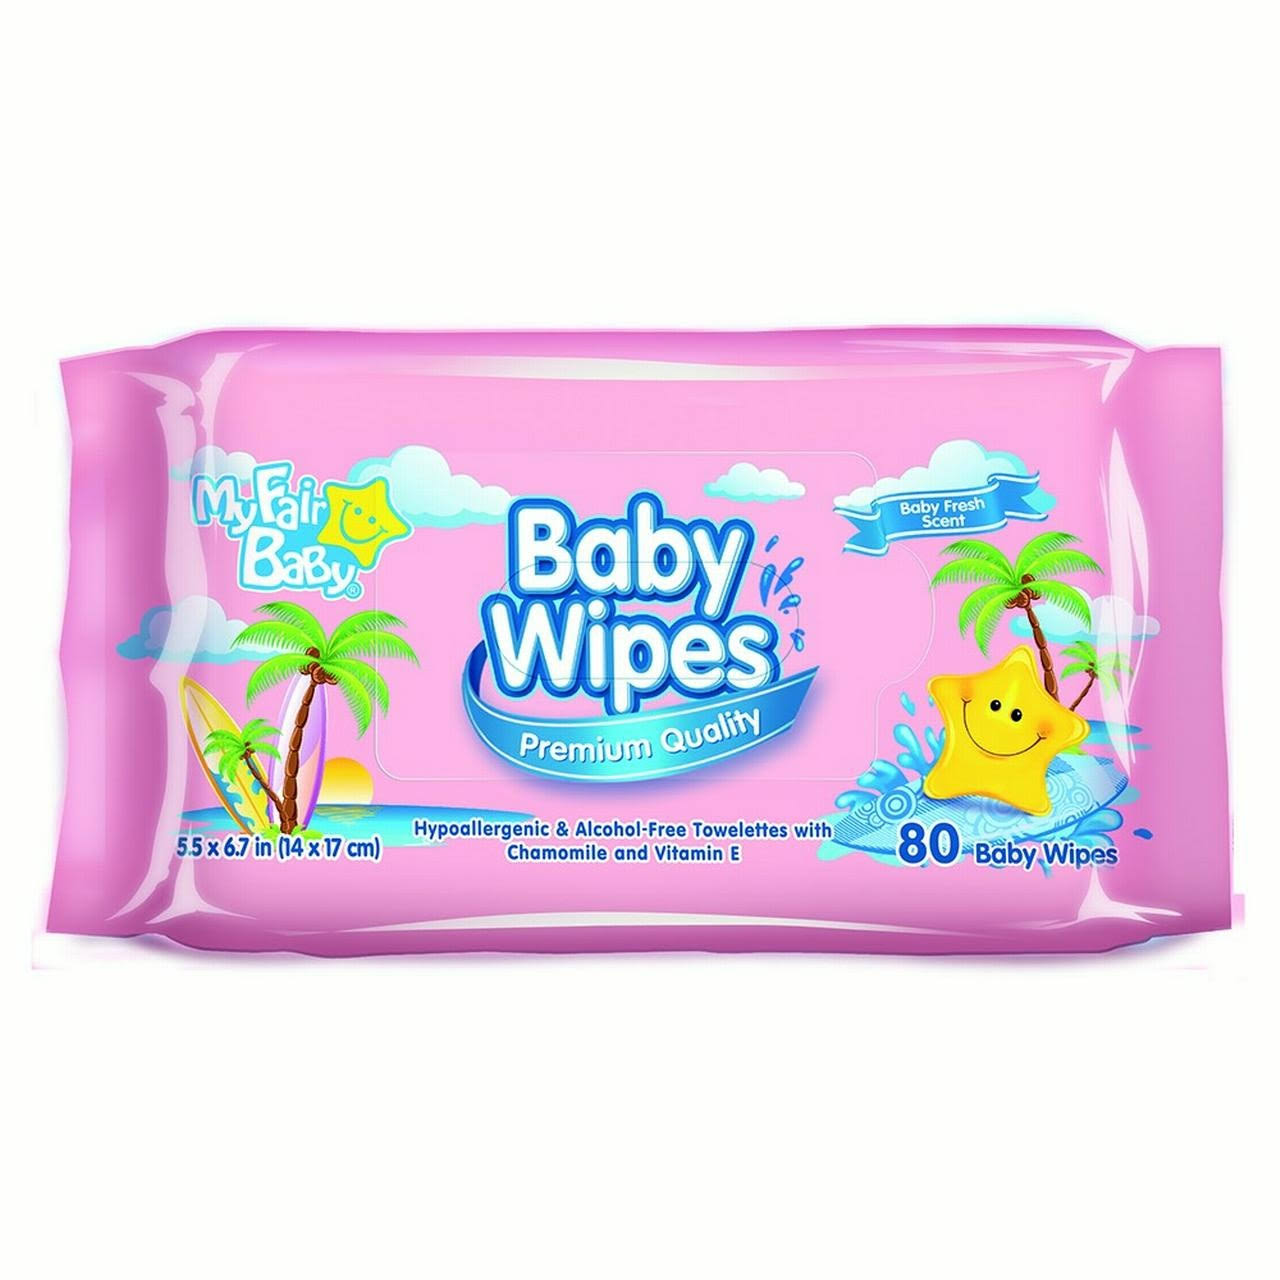 My Fair Baby Premium Baby Wipes, Pink, 80 CT | Nappies